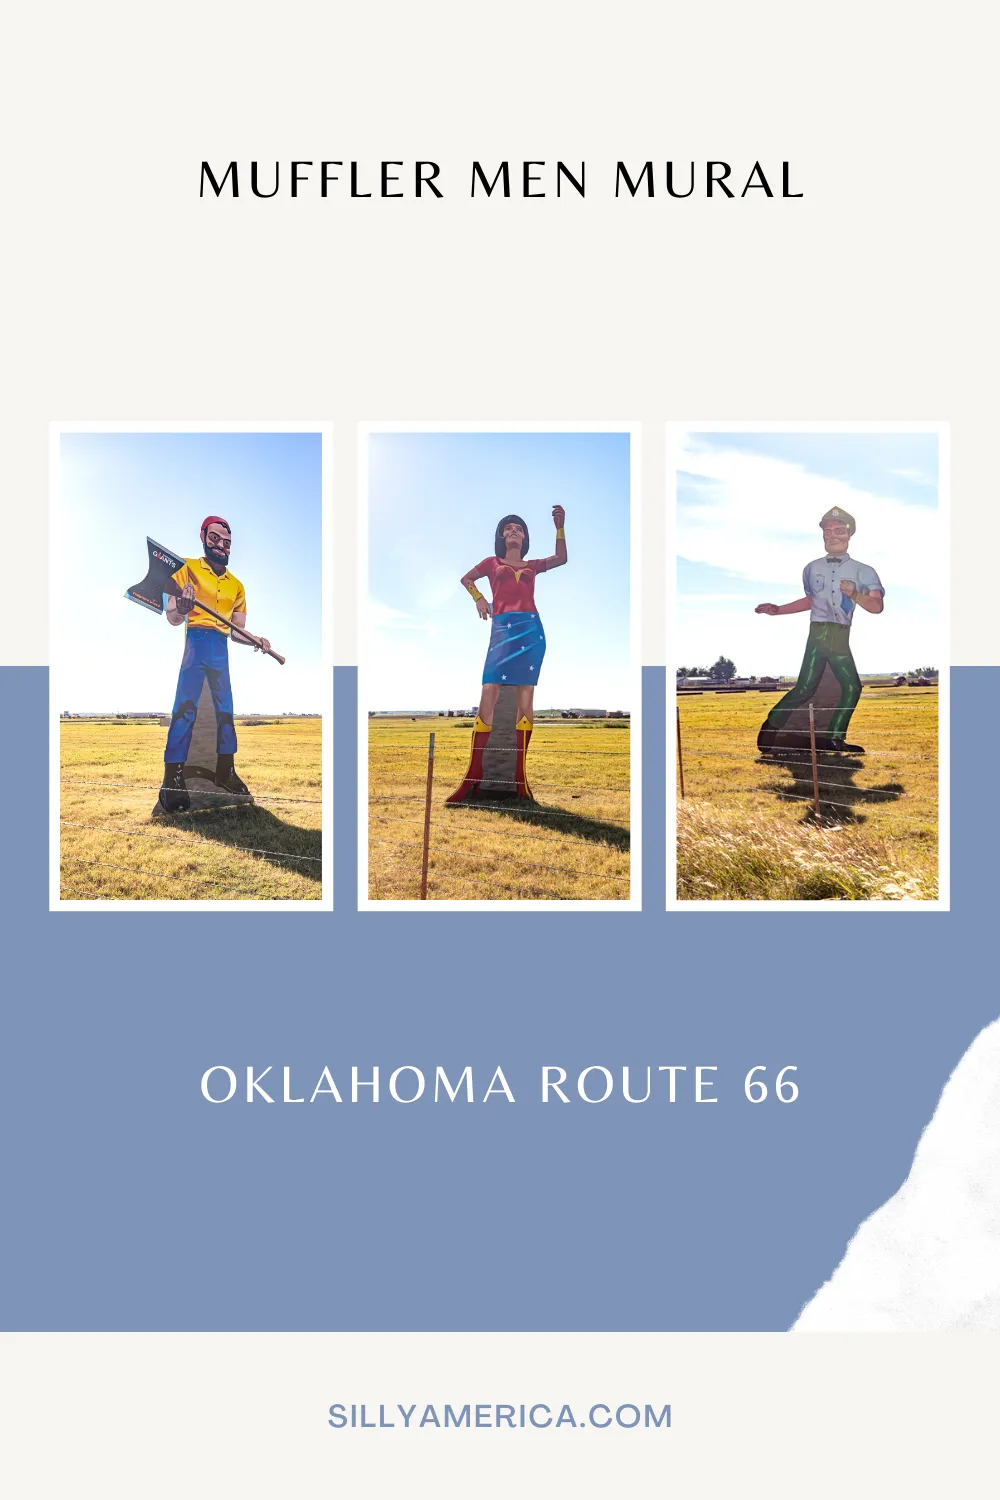 They say life imitates art. But, sometimes, art imitates art. And that’s what you’ll find in Calument, Oklahoma when you see the Muffler Men mural on Route 66. Visit this weird roadside attraction on a Route 66 road trip. A bucket list road trip stop perfect for any travel itinerary.  #RoadTrips #RoadTripStop #Route66 #Route66RoadTrip #OklahomaRoute66 #Oklahoma #OklahomaRoadTrip #OklahomaRoadsideAttractions #RoadsideAttractions #RoadsideAttraction #RoadsideAmerica #RoadTrip